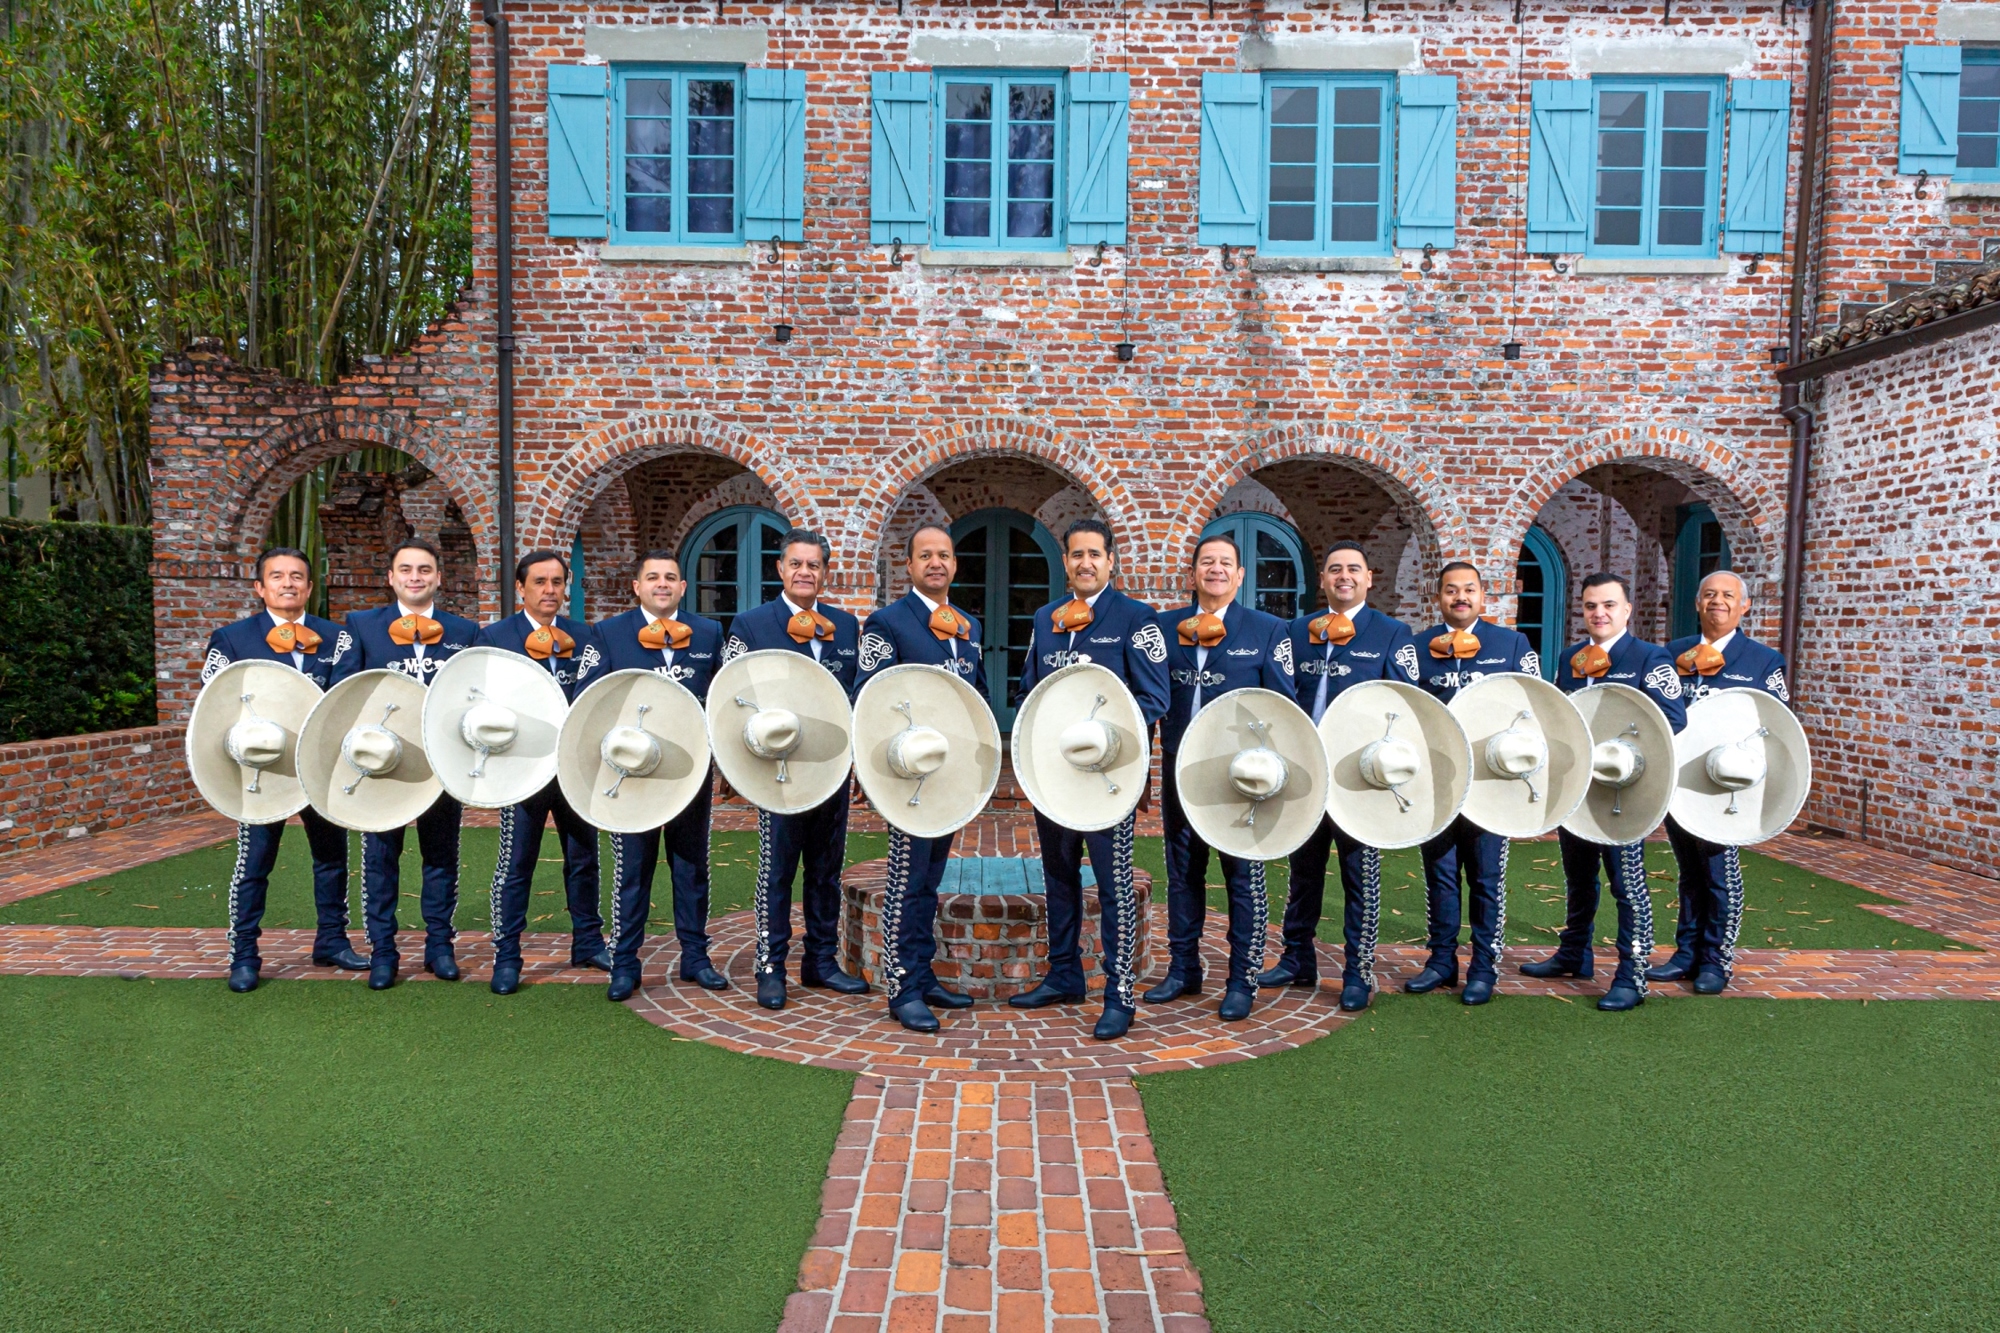 Mariachi Cobre is one of the world's foremost ambassadors of mariachi music. (Courtesy photo)